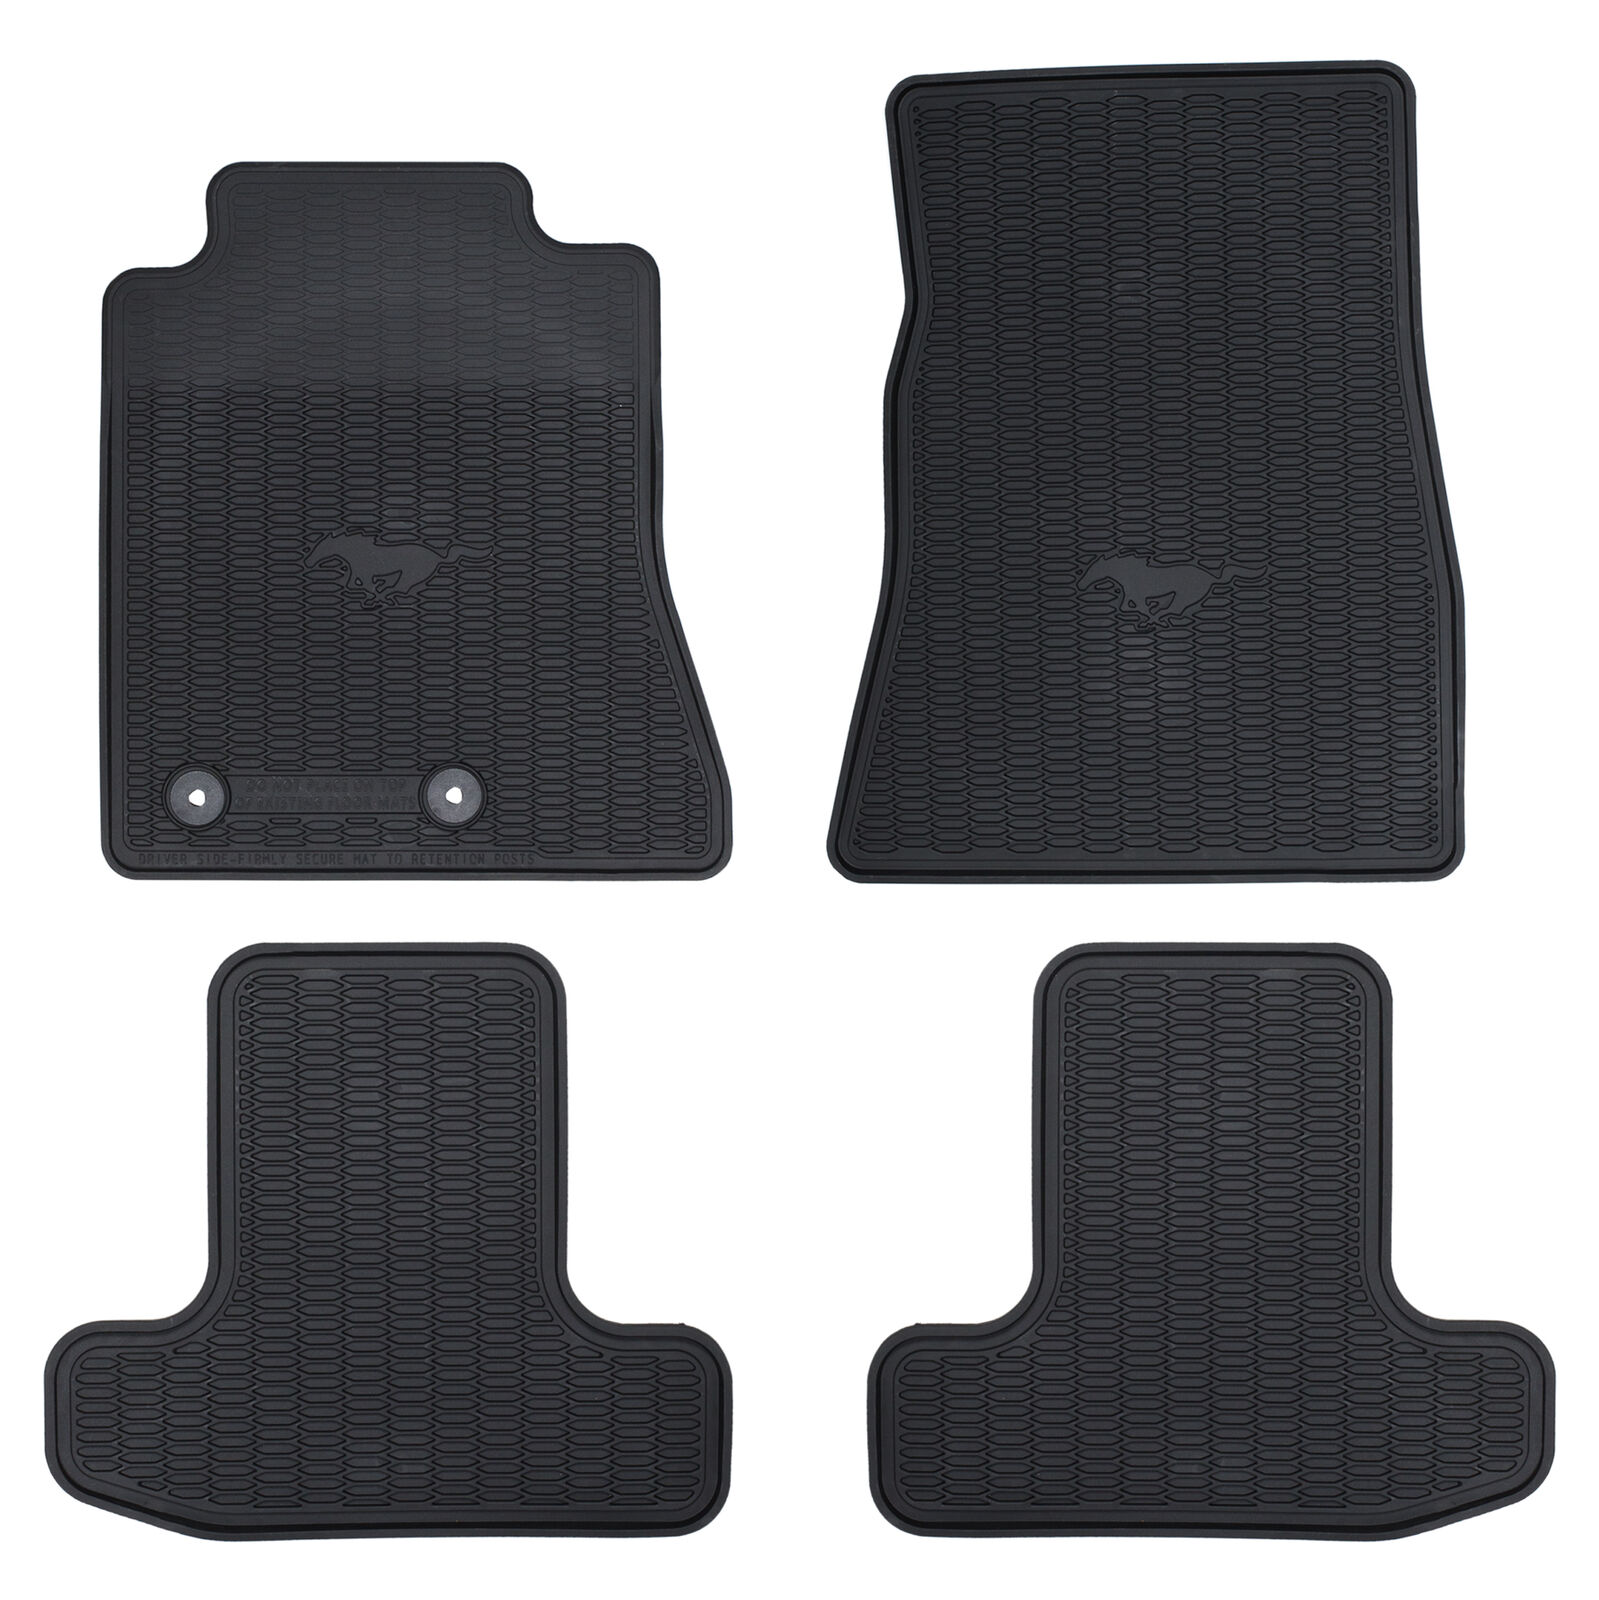 OEM NEW 2015-2020 FORD Mustang Front & Rear All Weather Floor Mats Set Black